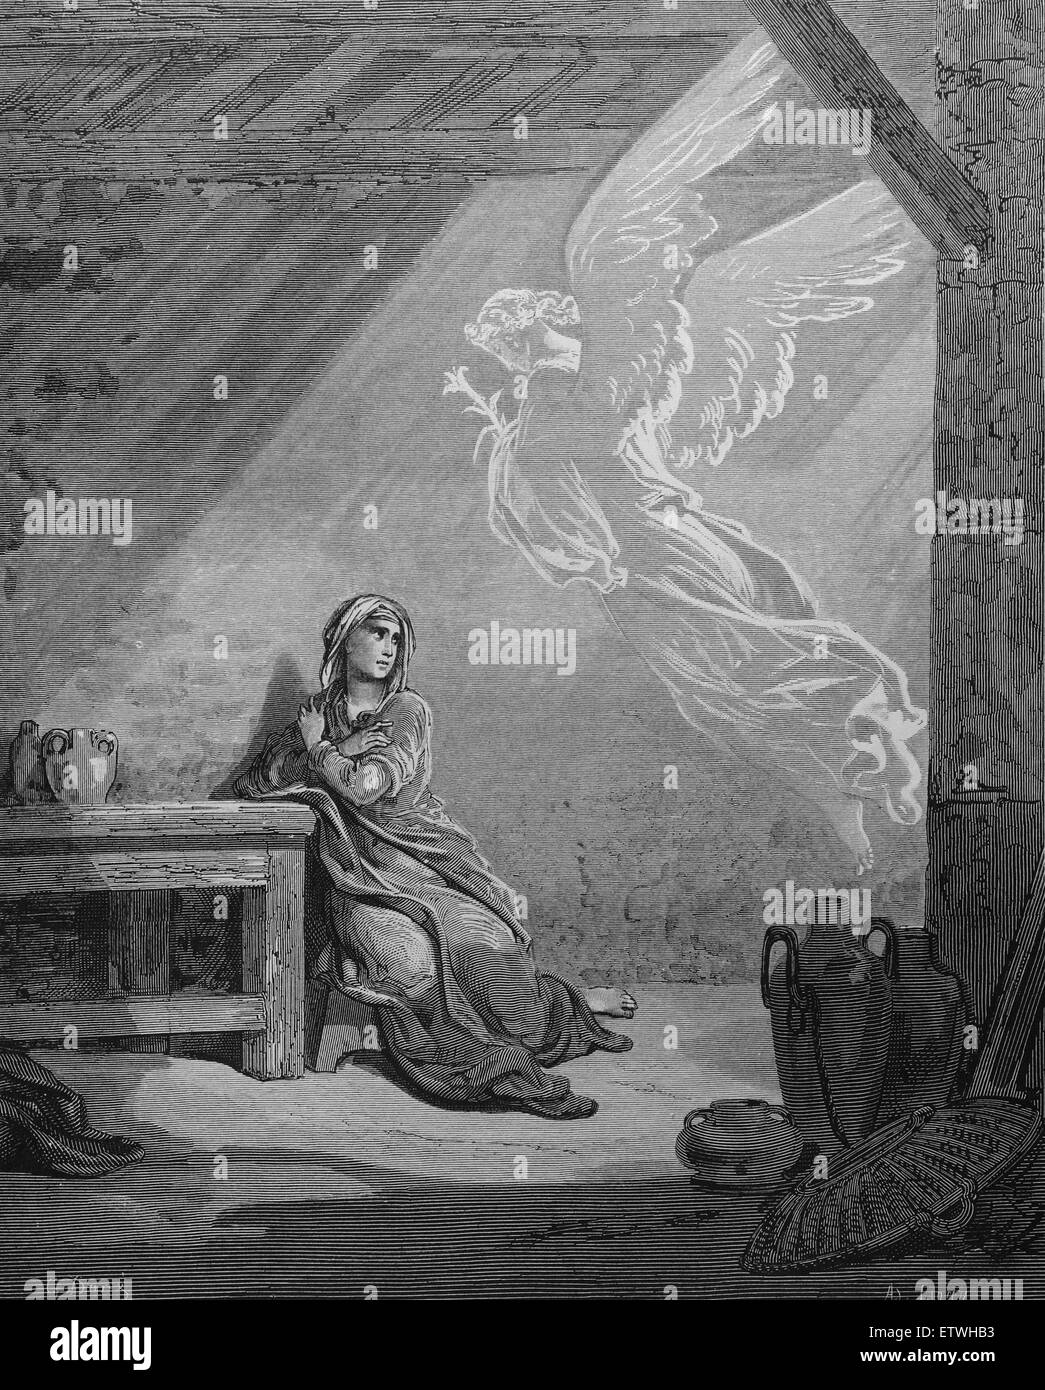 New Testament. The Annunciation. Luke 1:30. Engraving by Gustave Dore. 19th century. Stock Photo